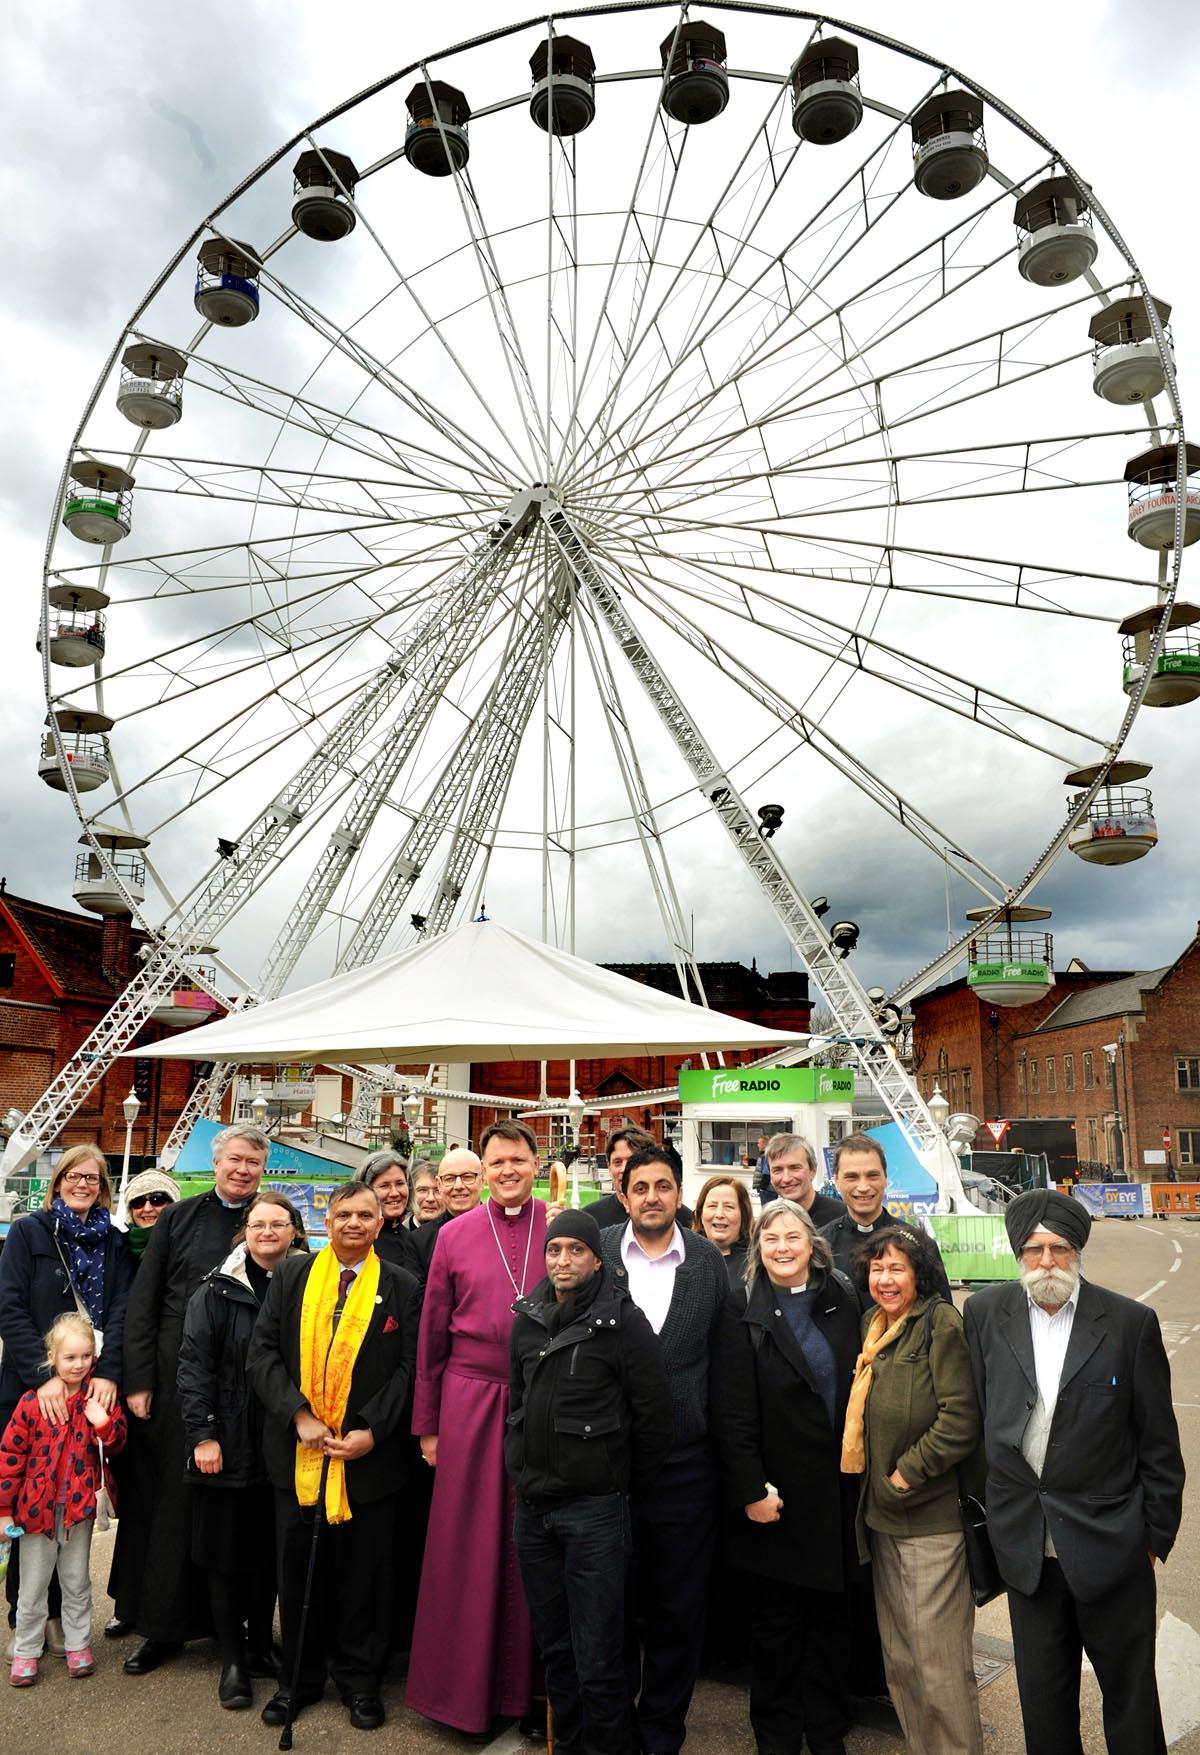 The Bishop of Dudley and friends in front of the wheel